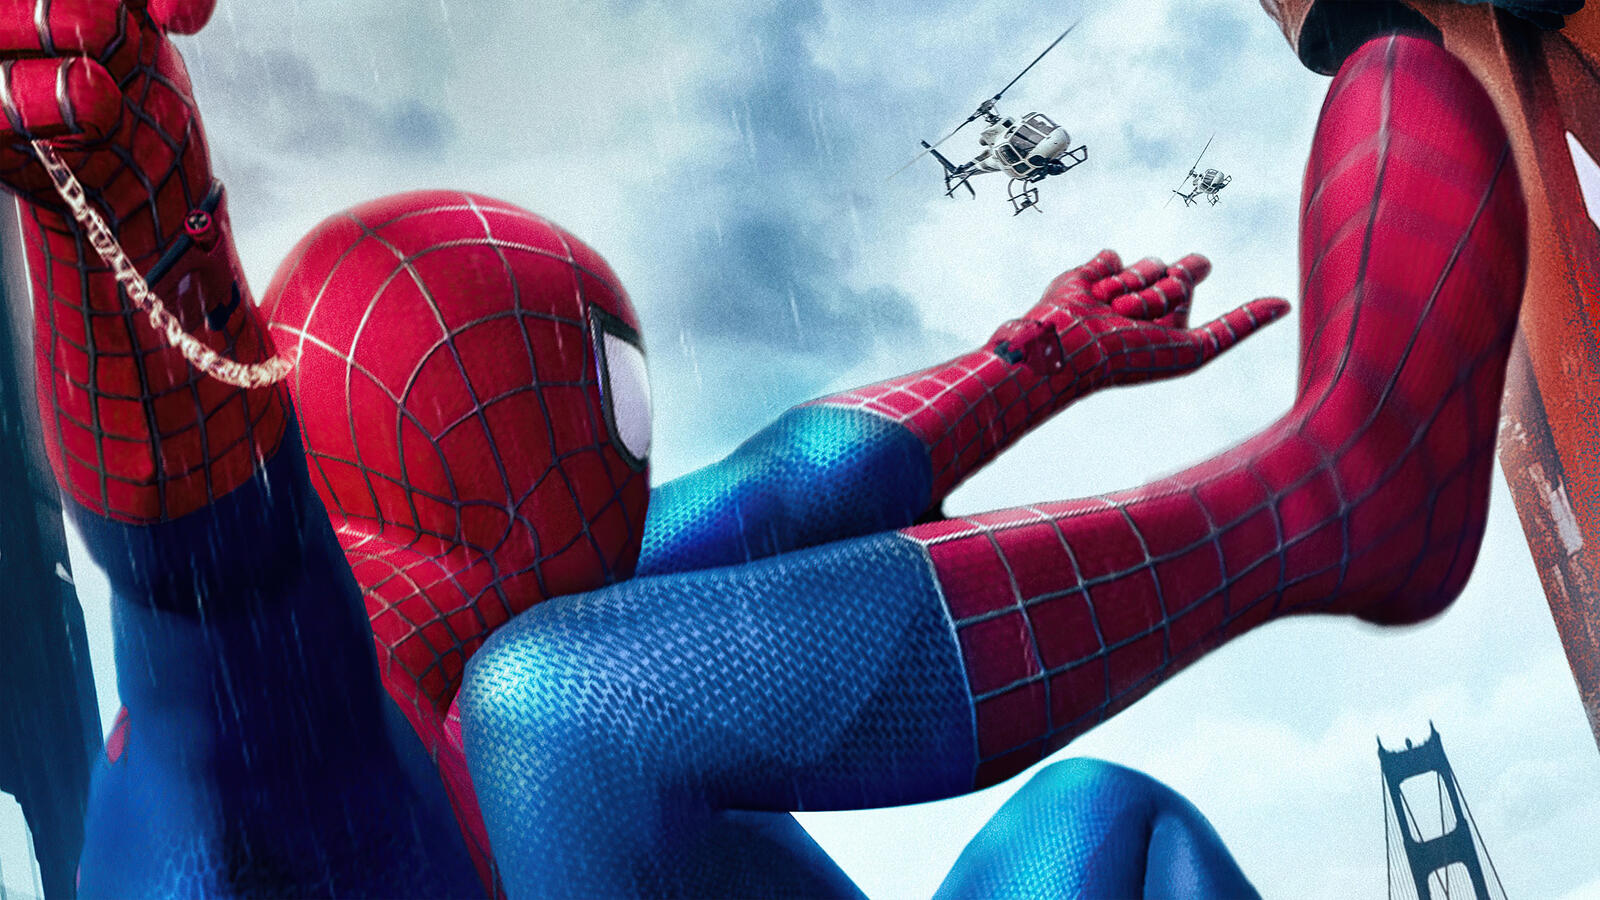 Wallpapers spider man helicopter superheroes on the desktop